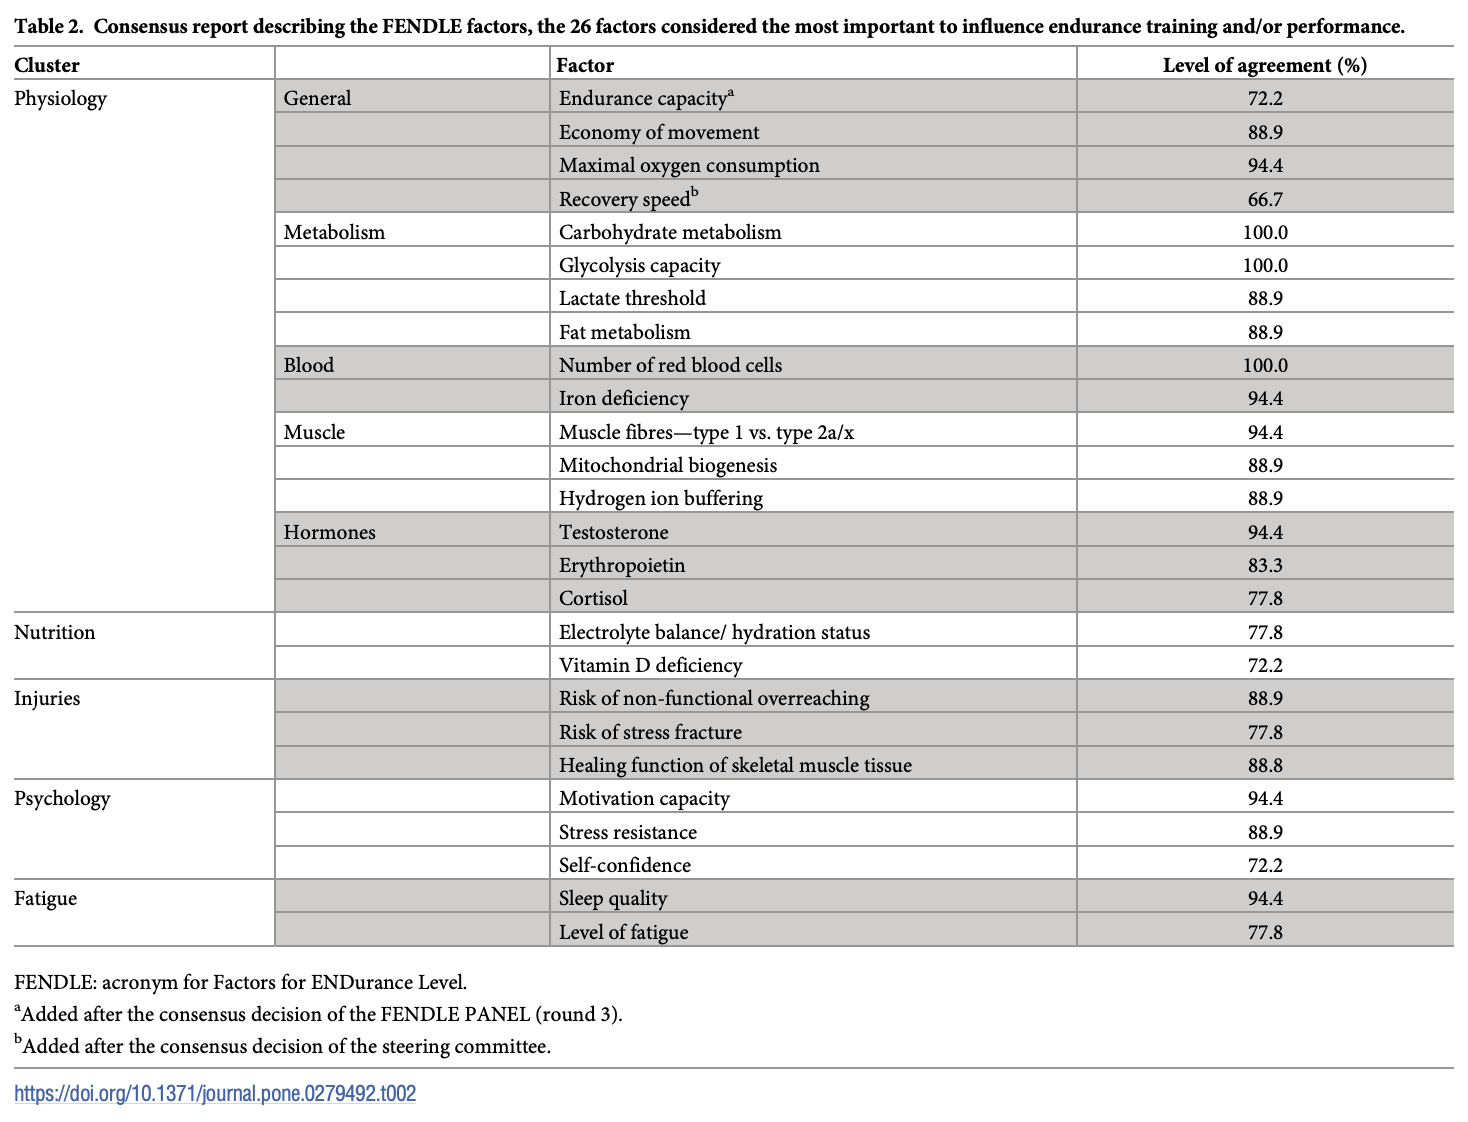 Consensus report on FENDLE factors: 26 factors that influence high-level running performance